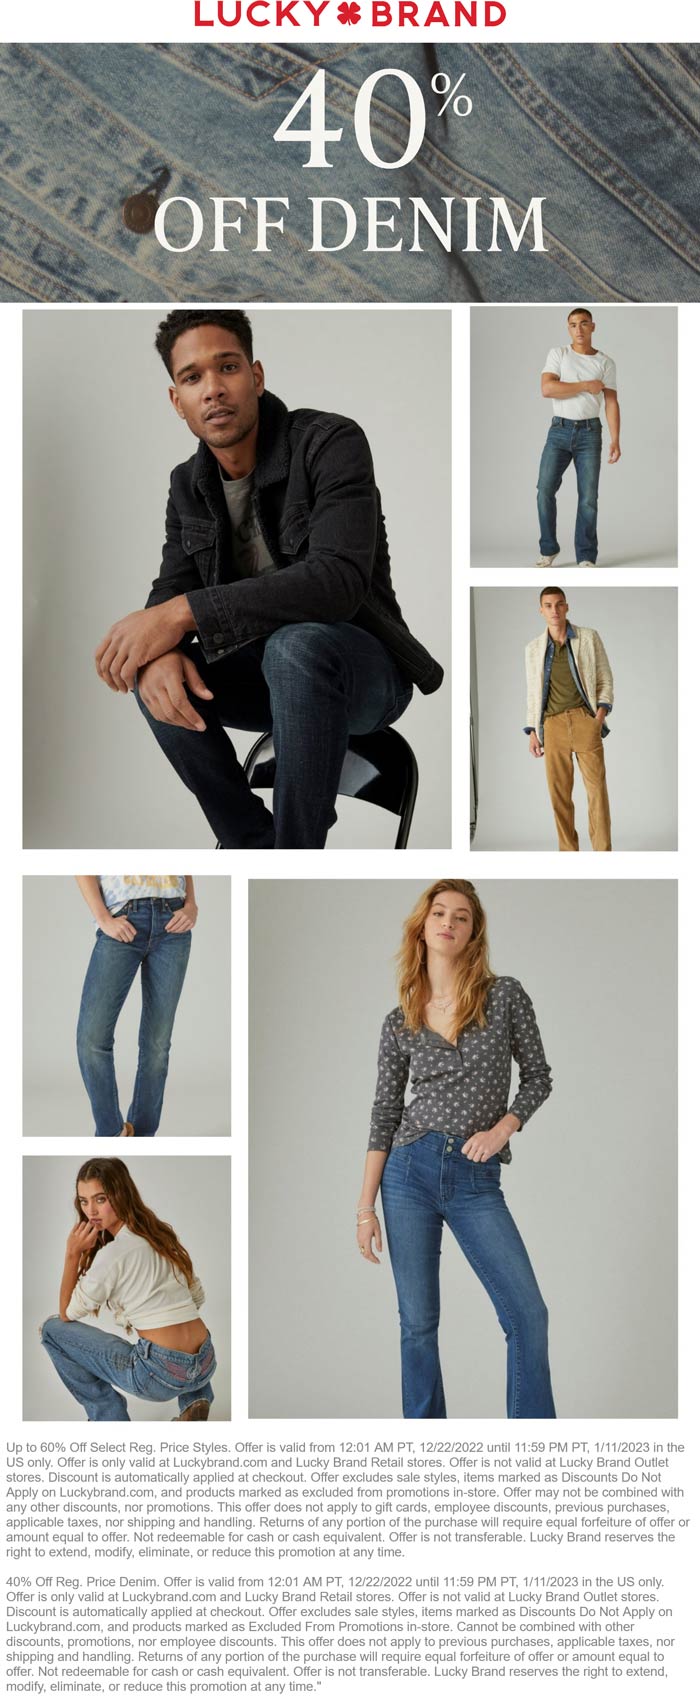 Lucky Brand stores Coupon  40% off denim at Lucky Brand, ditto online #luckybrand 